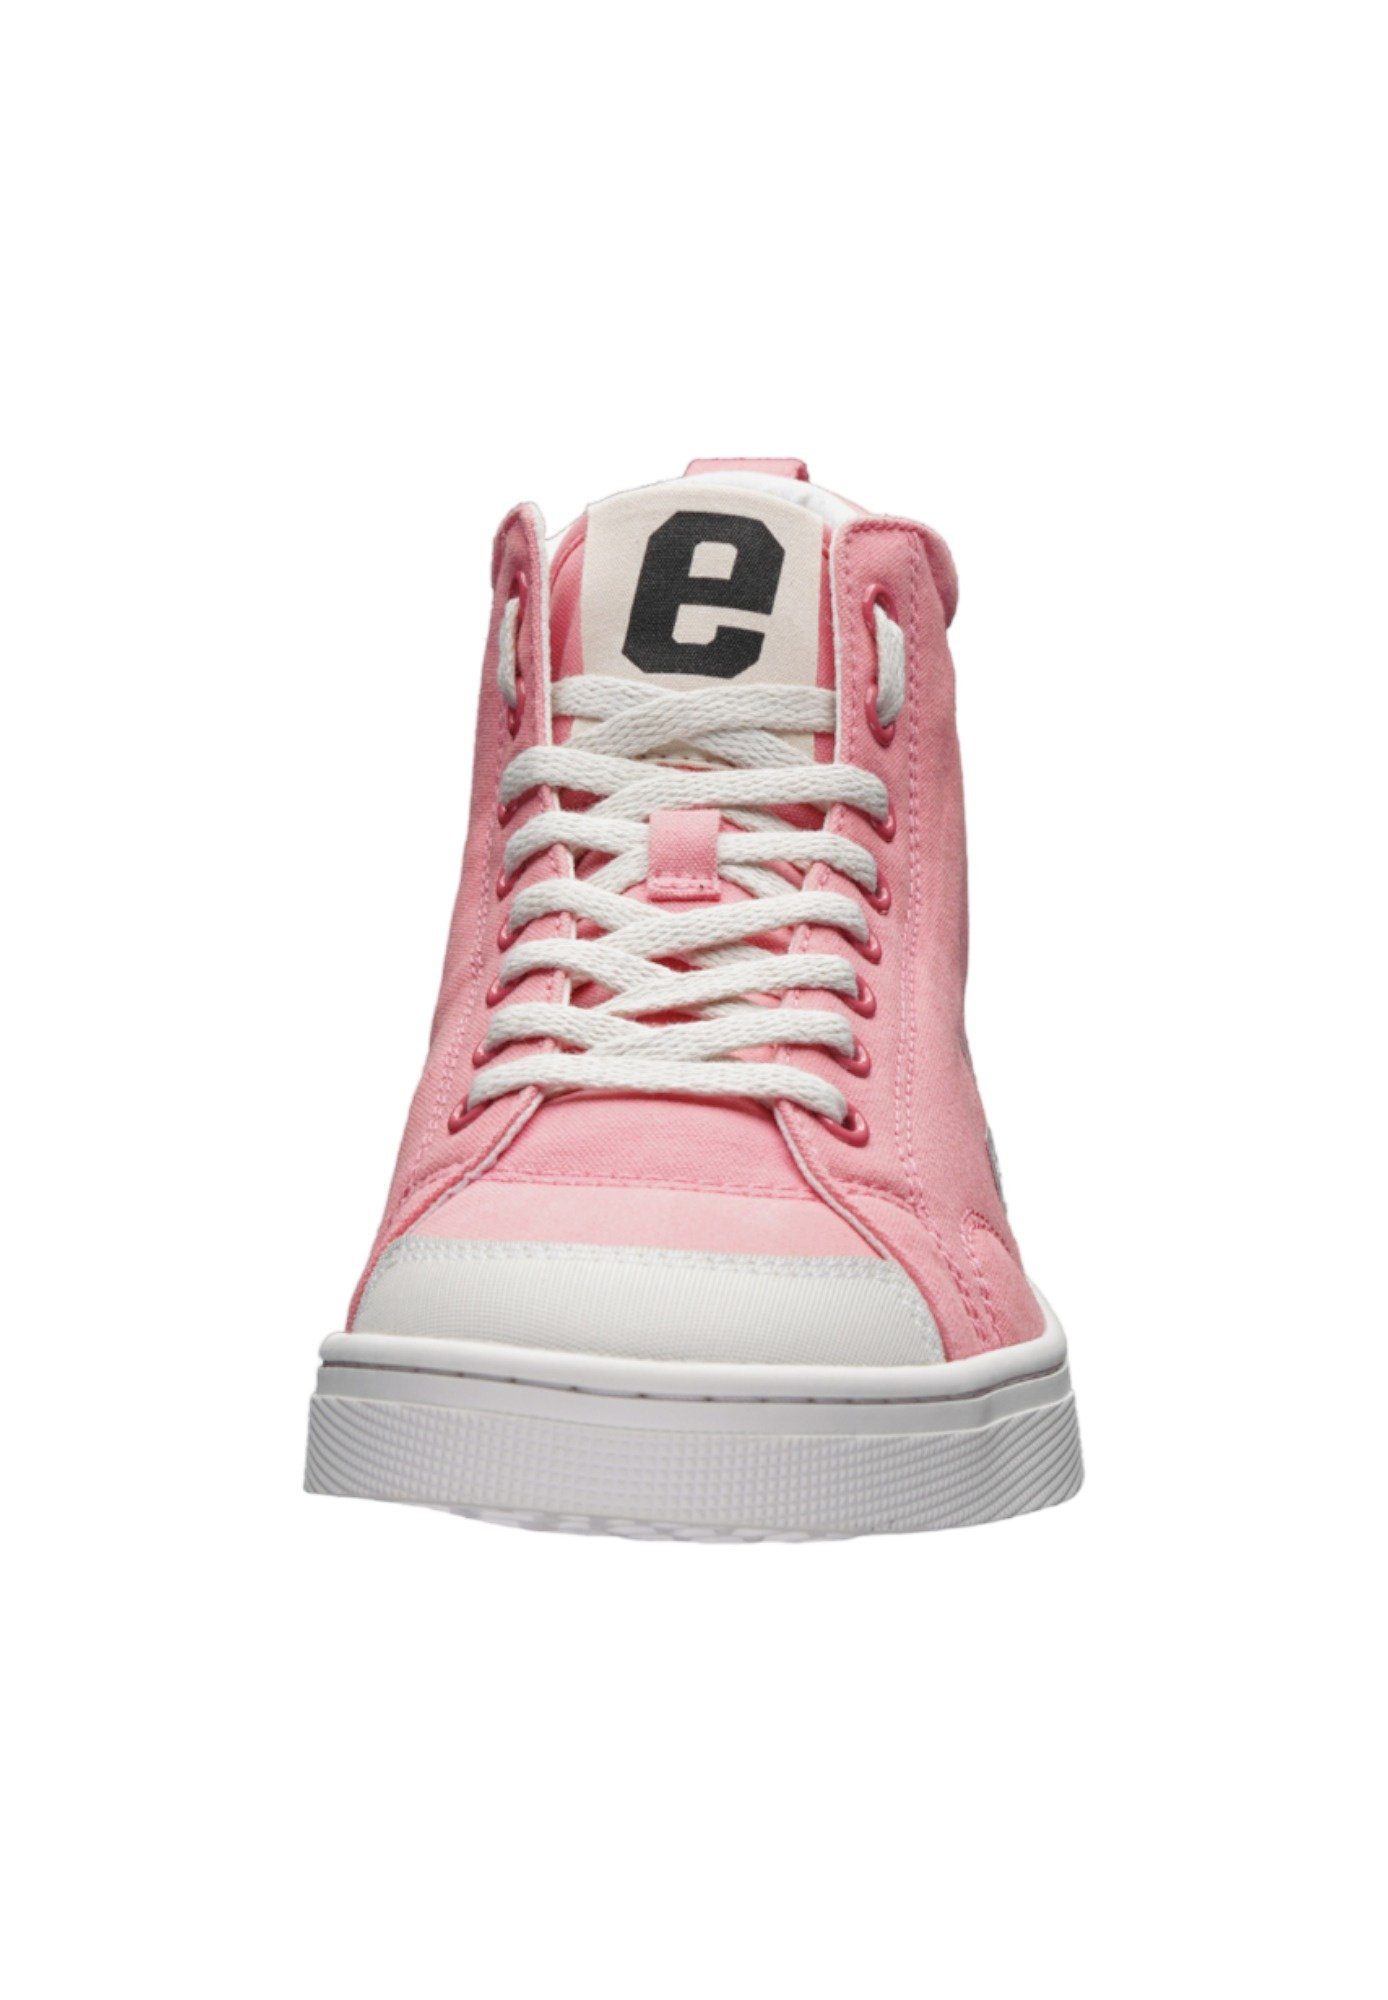 ETHLETIC Active Hi Cut Sneaker Produkt White - Pink Strawberry Fairtrade Just